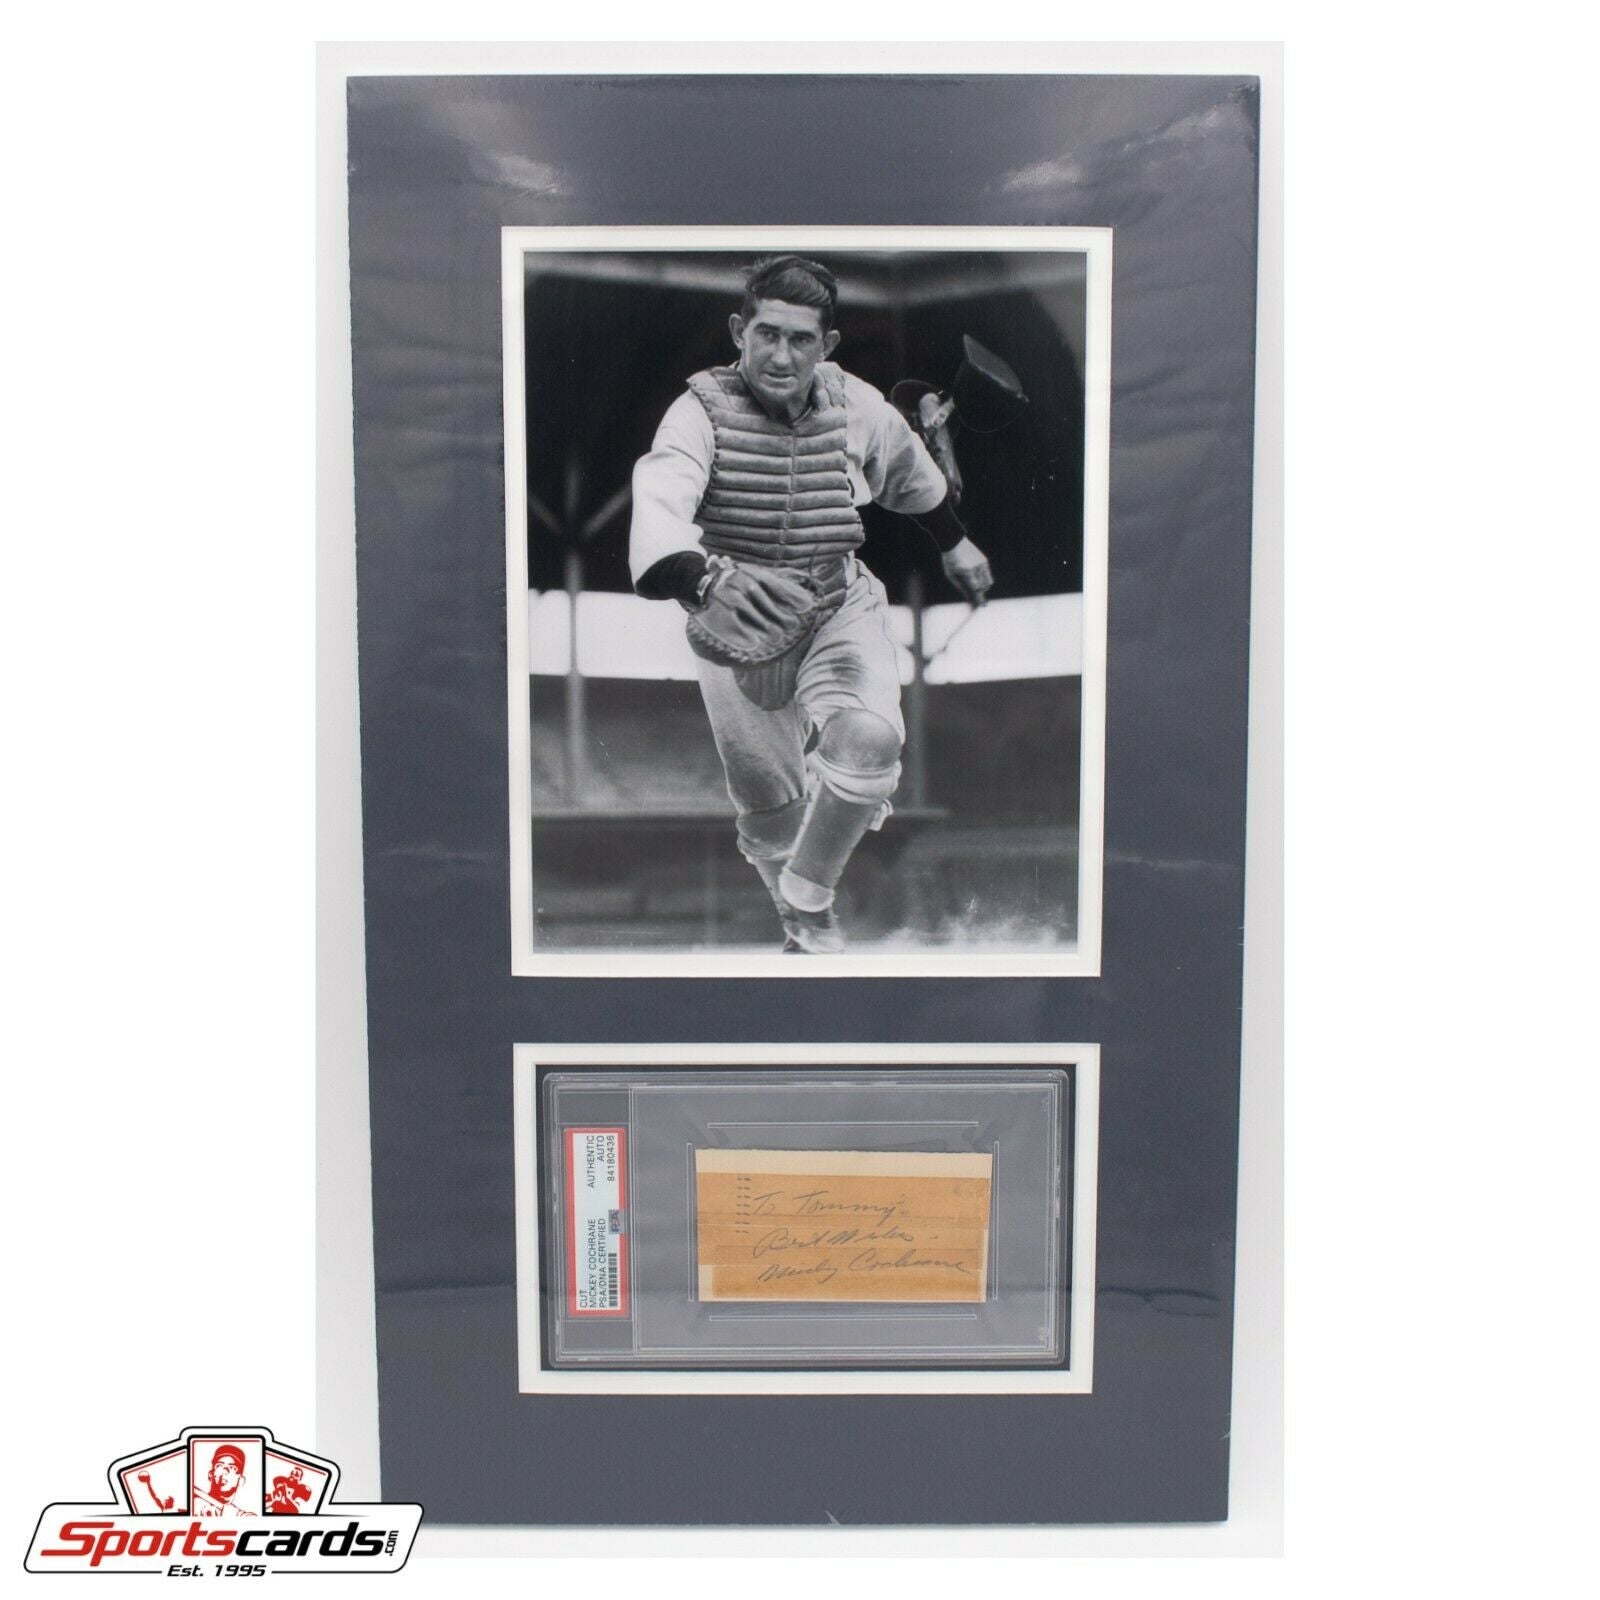 Mickey Cochrane PSA/DNA Signed Cut Card Matted w/ 8x10 Photo 12x20 overall